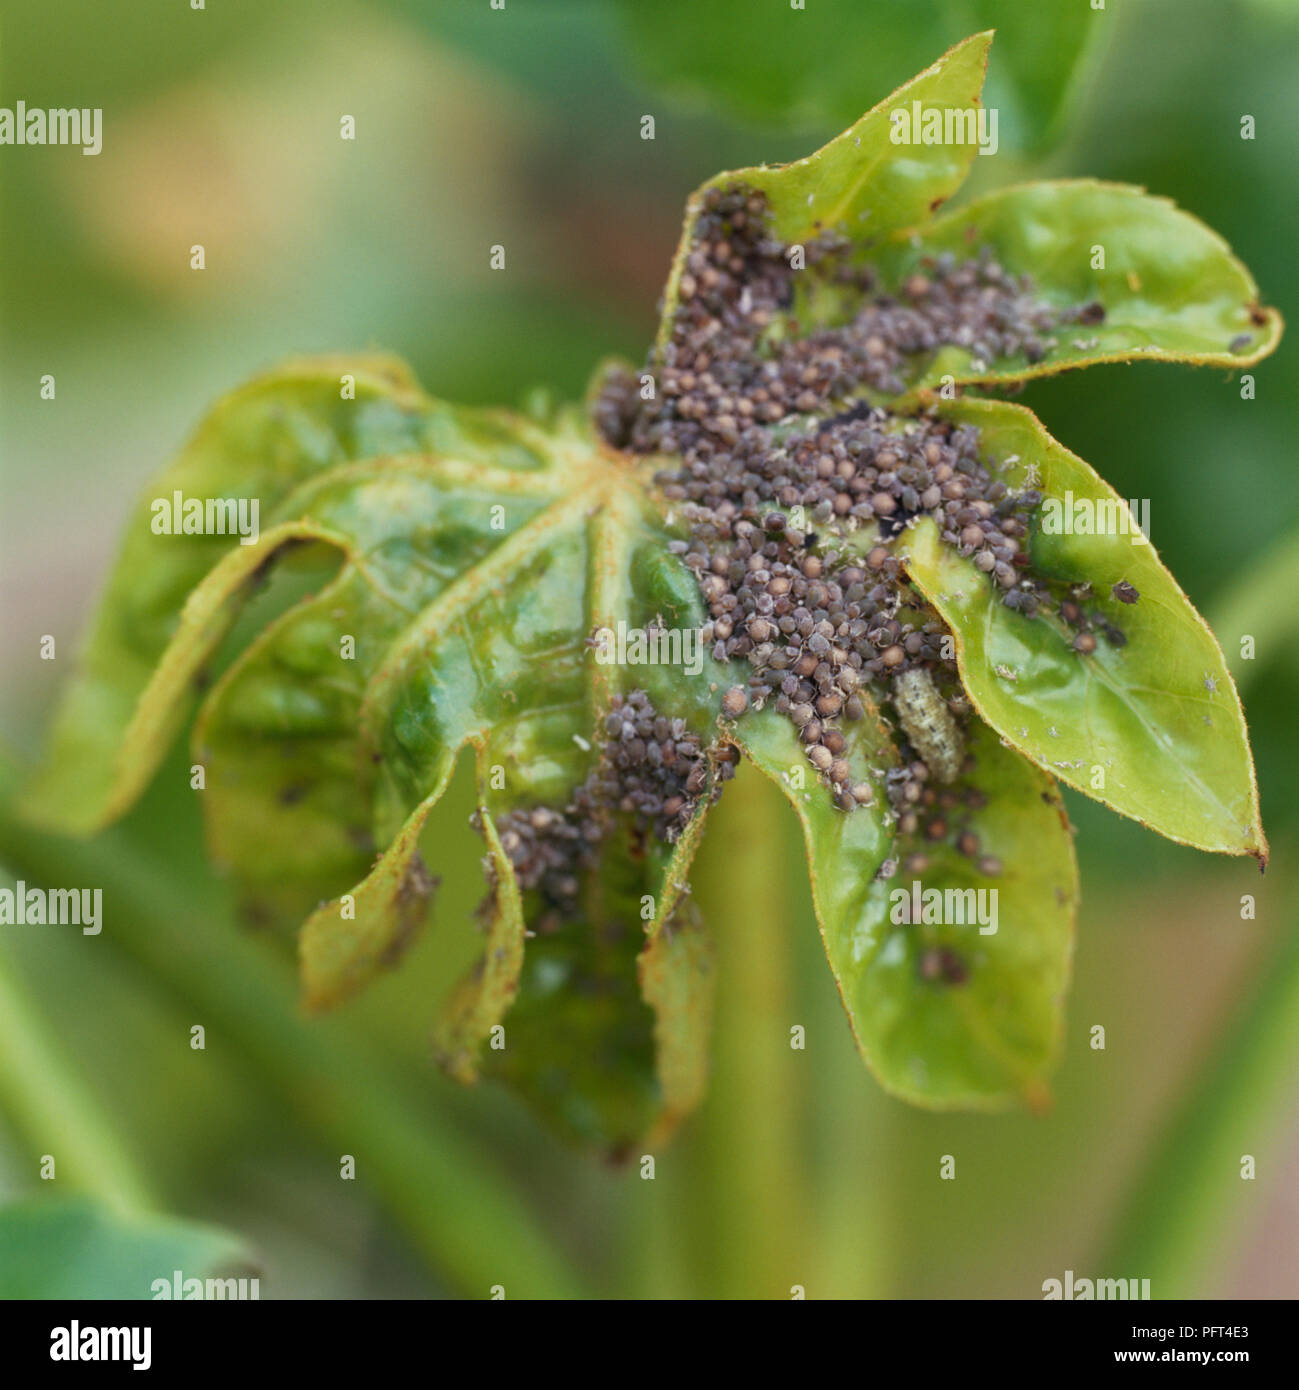 Leaf covered in aphids Stock Photo